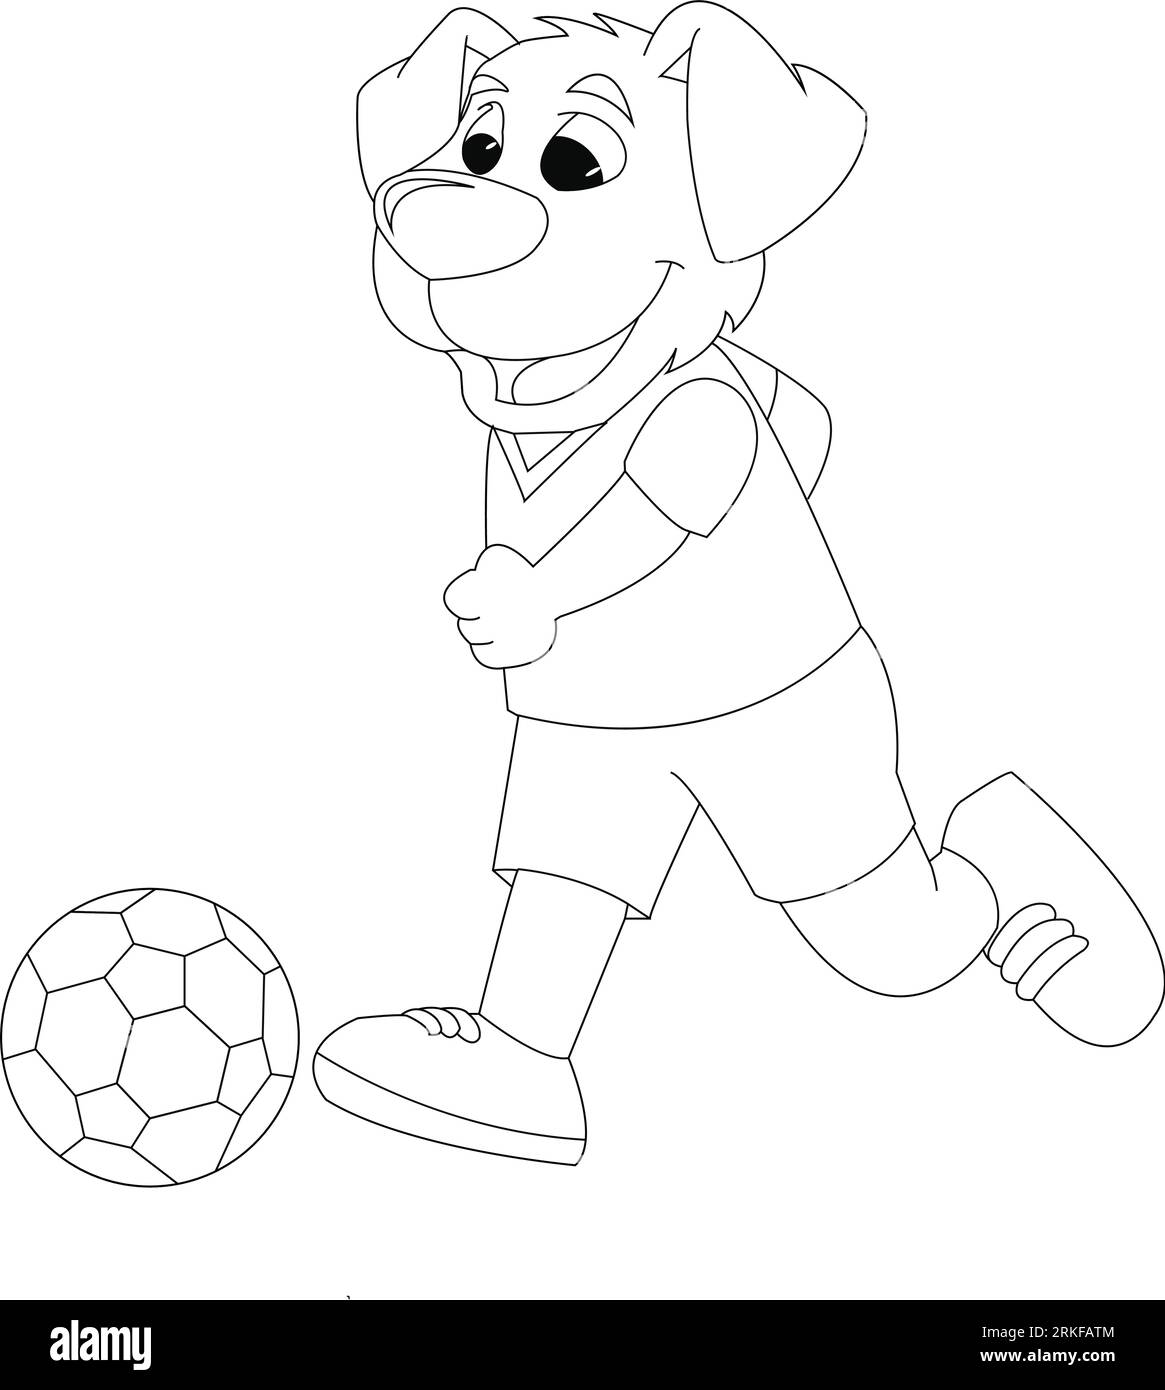 Coloring Page Outline Of cartoon boy with a soccer ball with dog. Football. Coloring book for kids. Cartoon illustration of a dog playing football Stock Vector